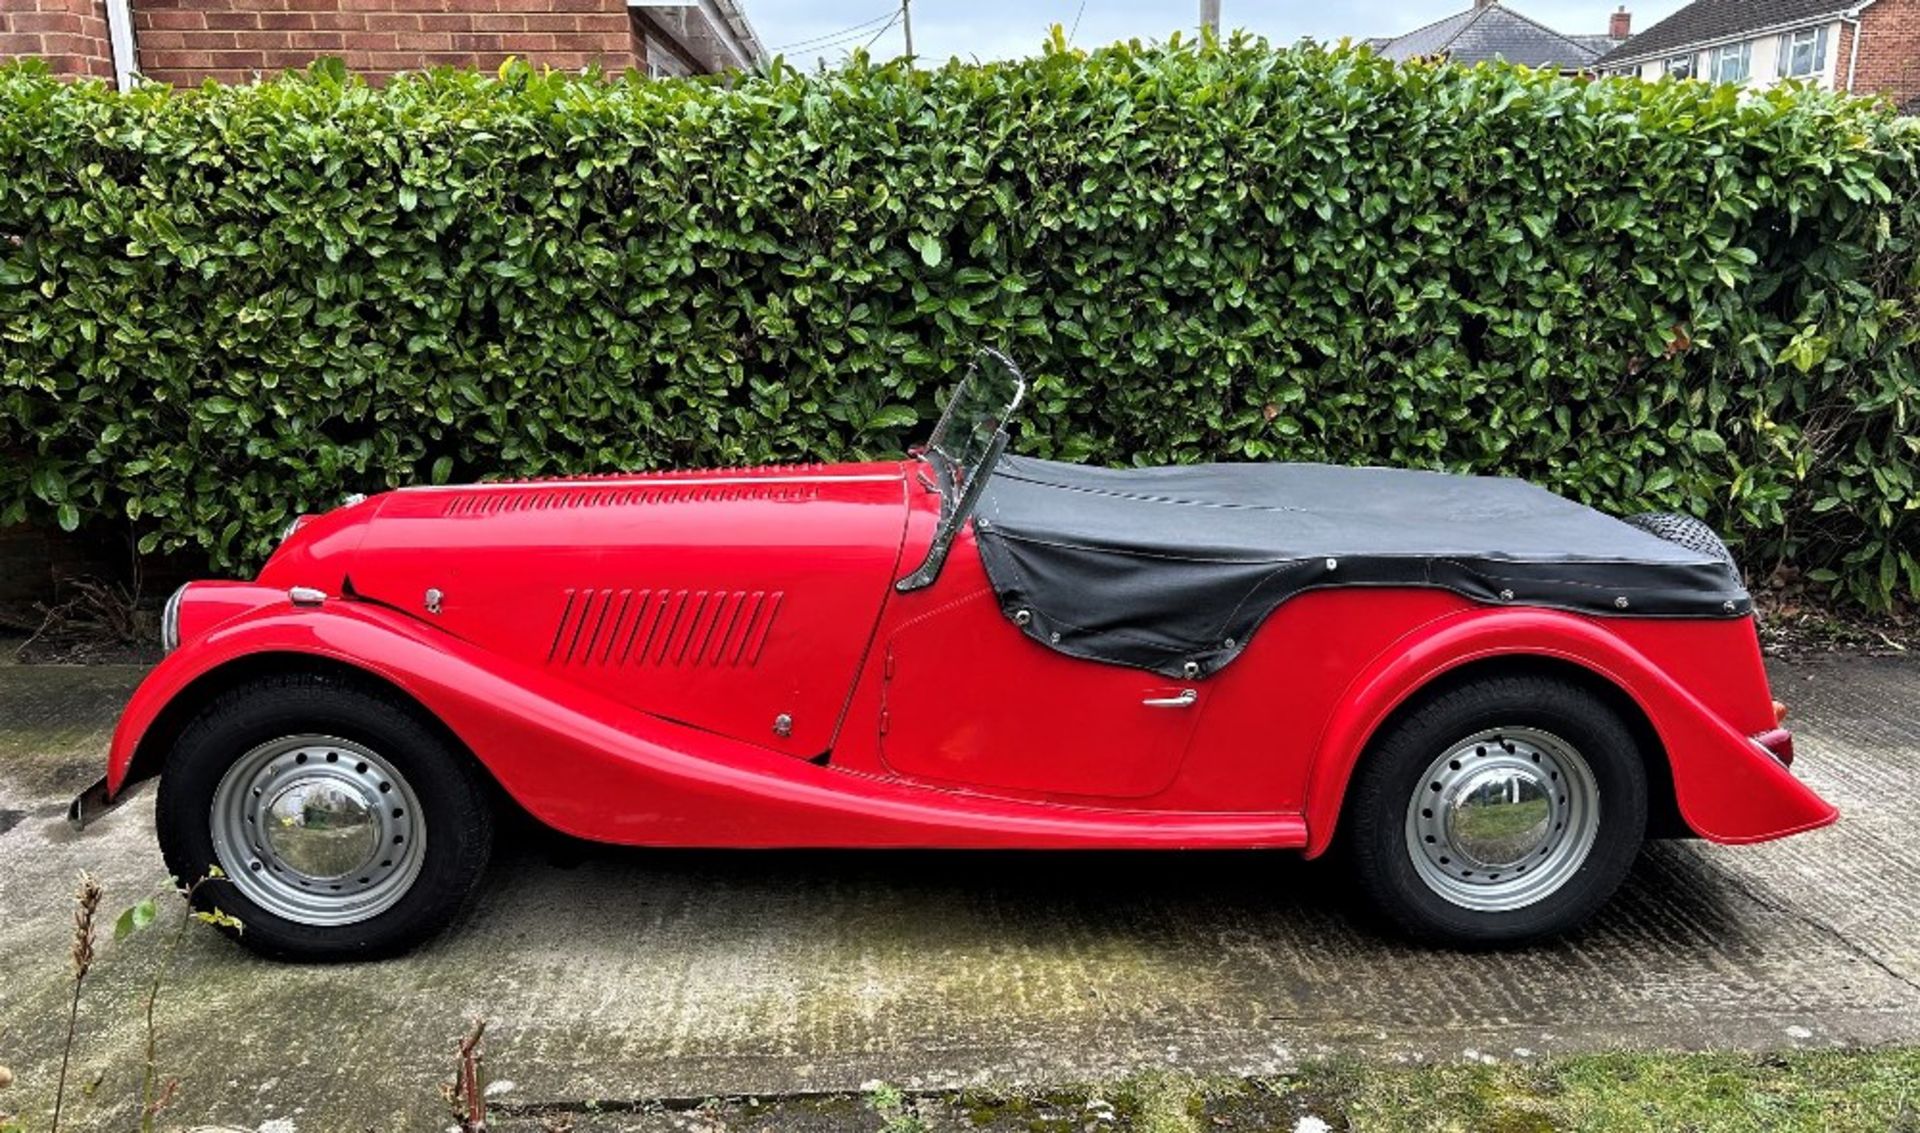 1959 MORGAN PLUS FOUR Registration Number: 698 AOK Chassis Number: 4398 Recorded Mileage: TBA - - Image 3 of 15